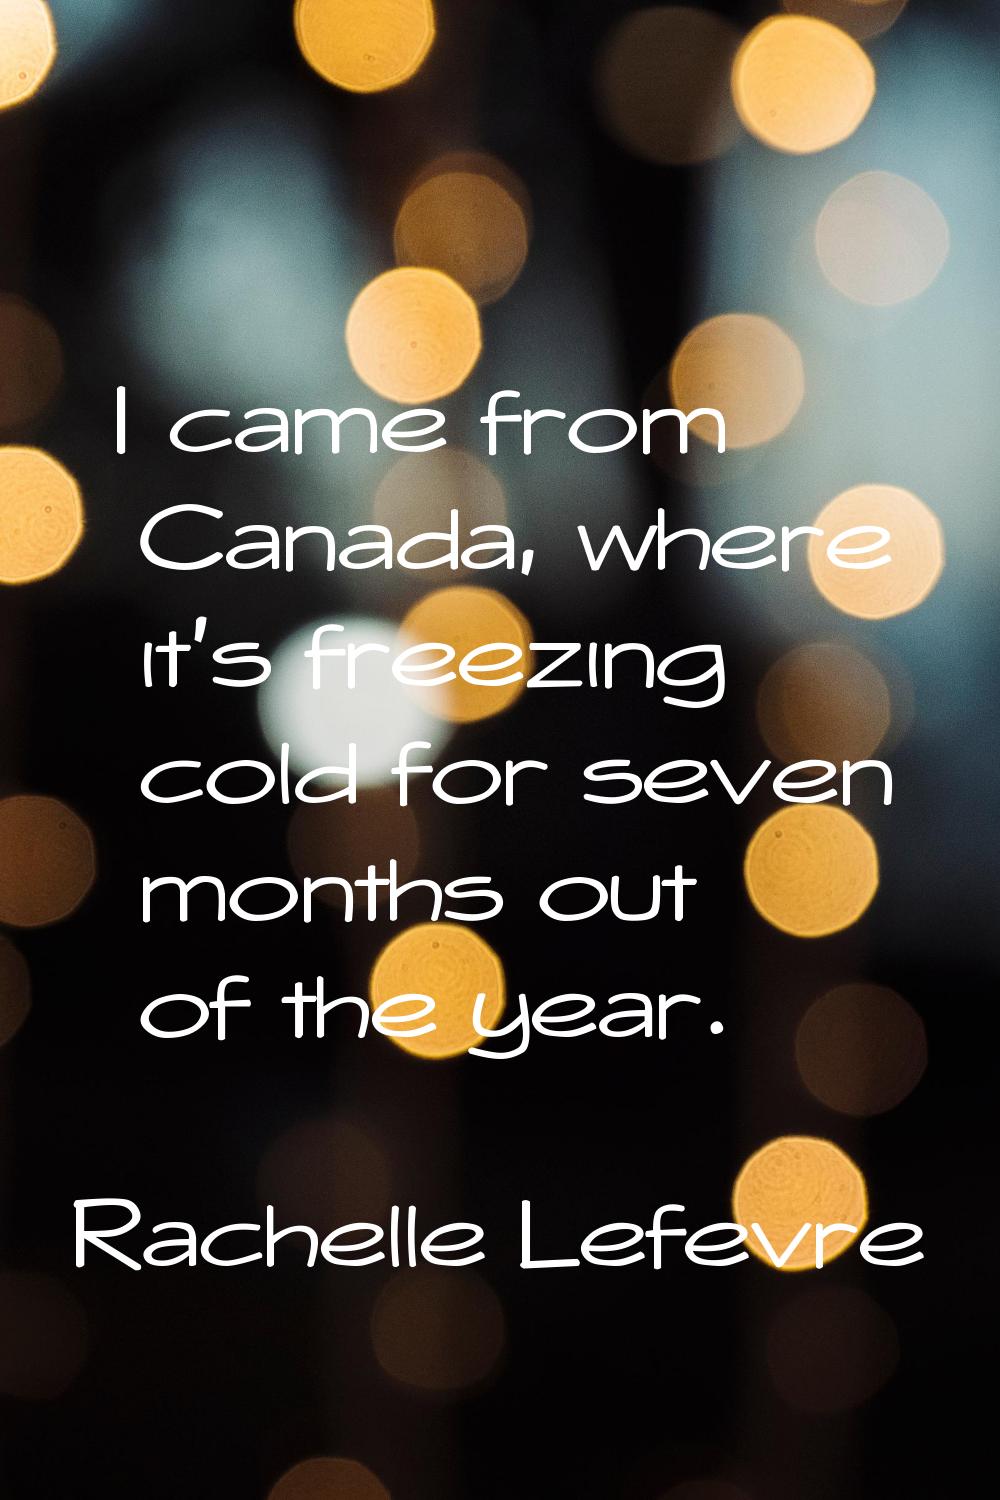 I came from Canada, where it's freezing cold for seven months out of the year.